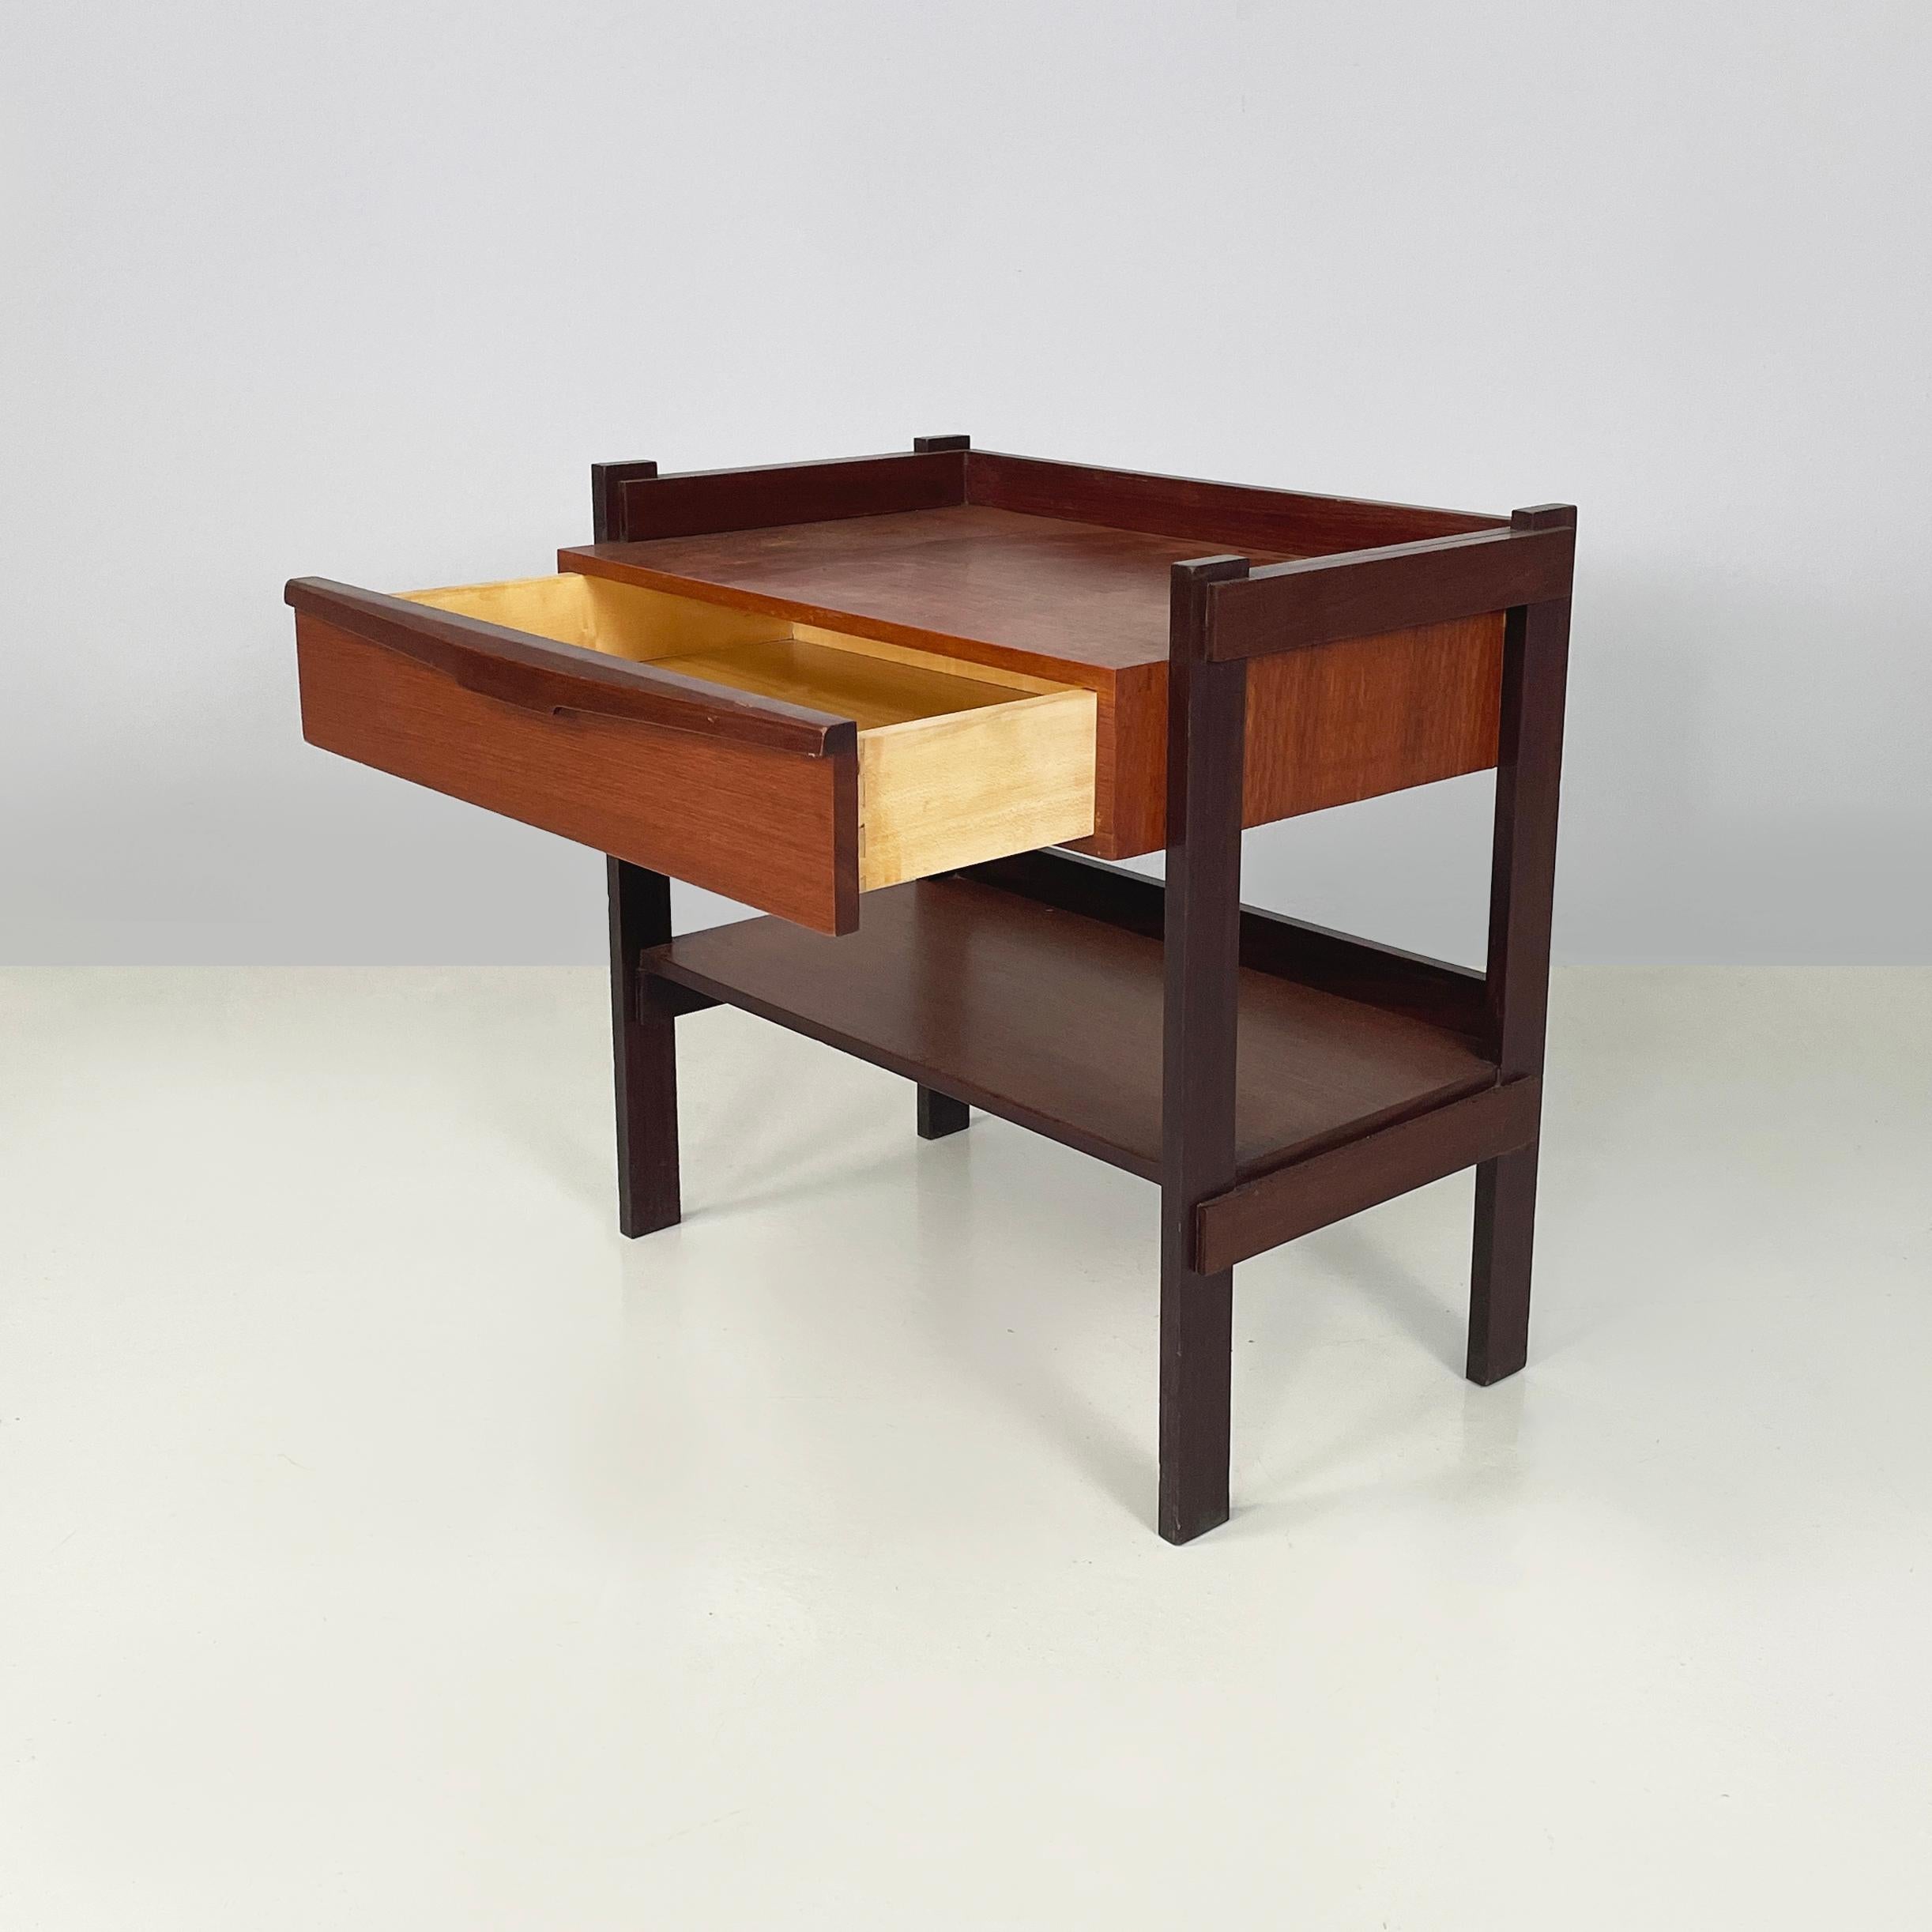 Italian mid-century modern Wooden coffee table with shelves and drawer, 1960s
Coffee table with double rectangular shelf, entirely in dark wood. There is a drawer on the front. The two shelves have a raised edge. The structure is made up of wooden